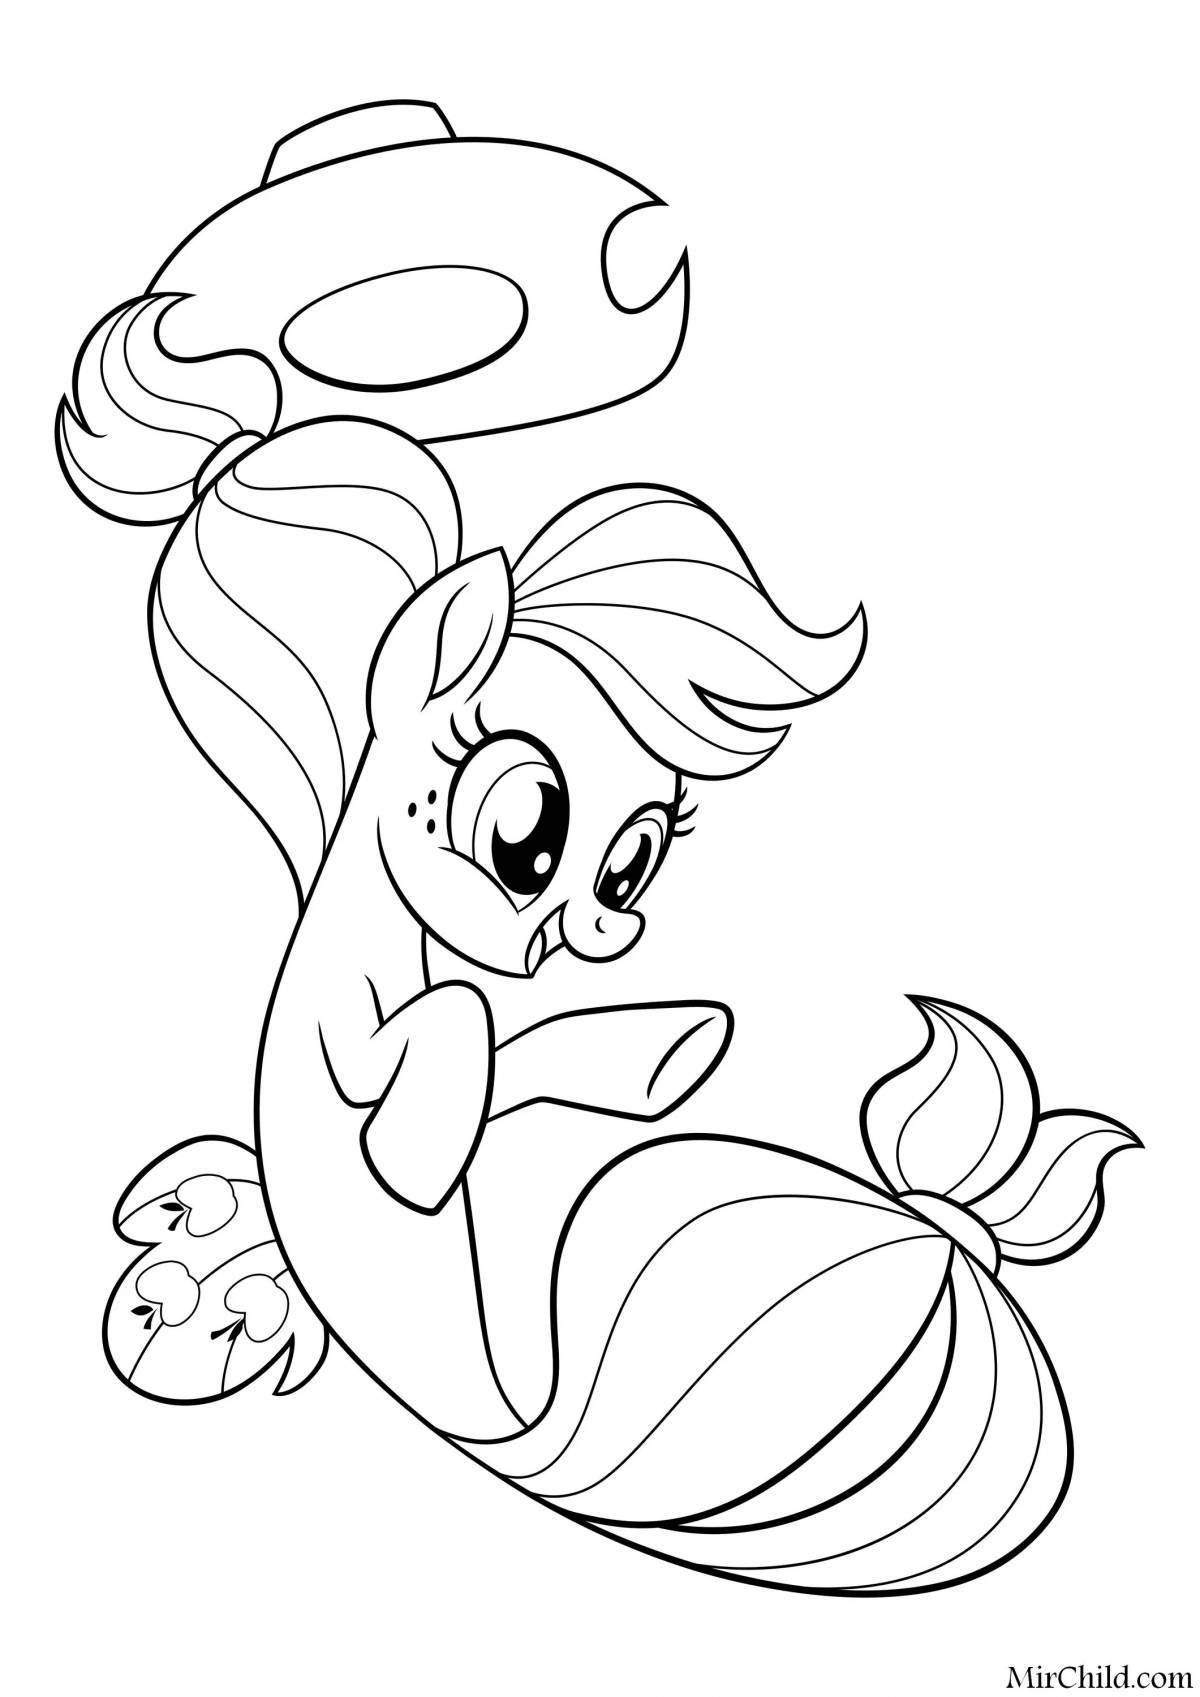 My little pony mermaid coloring page animated